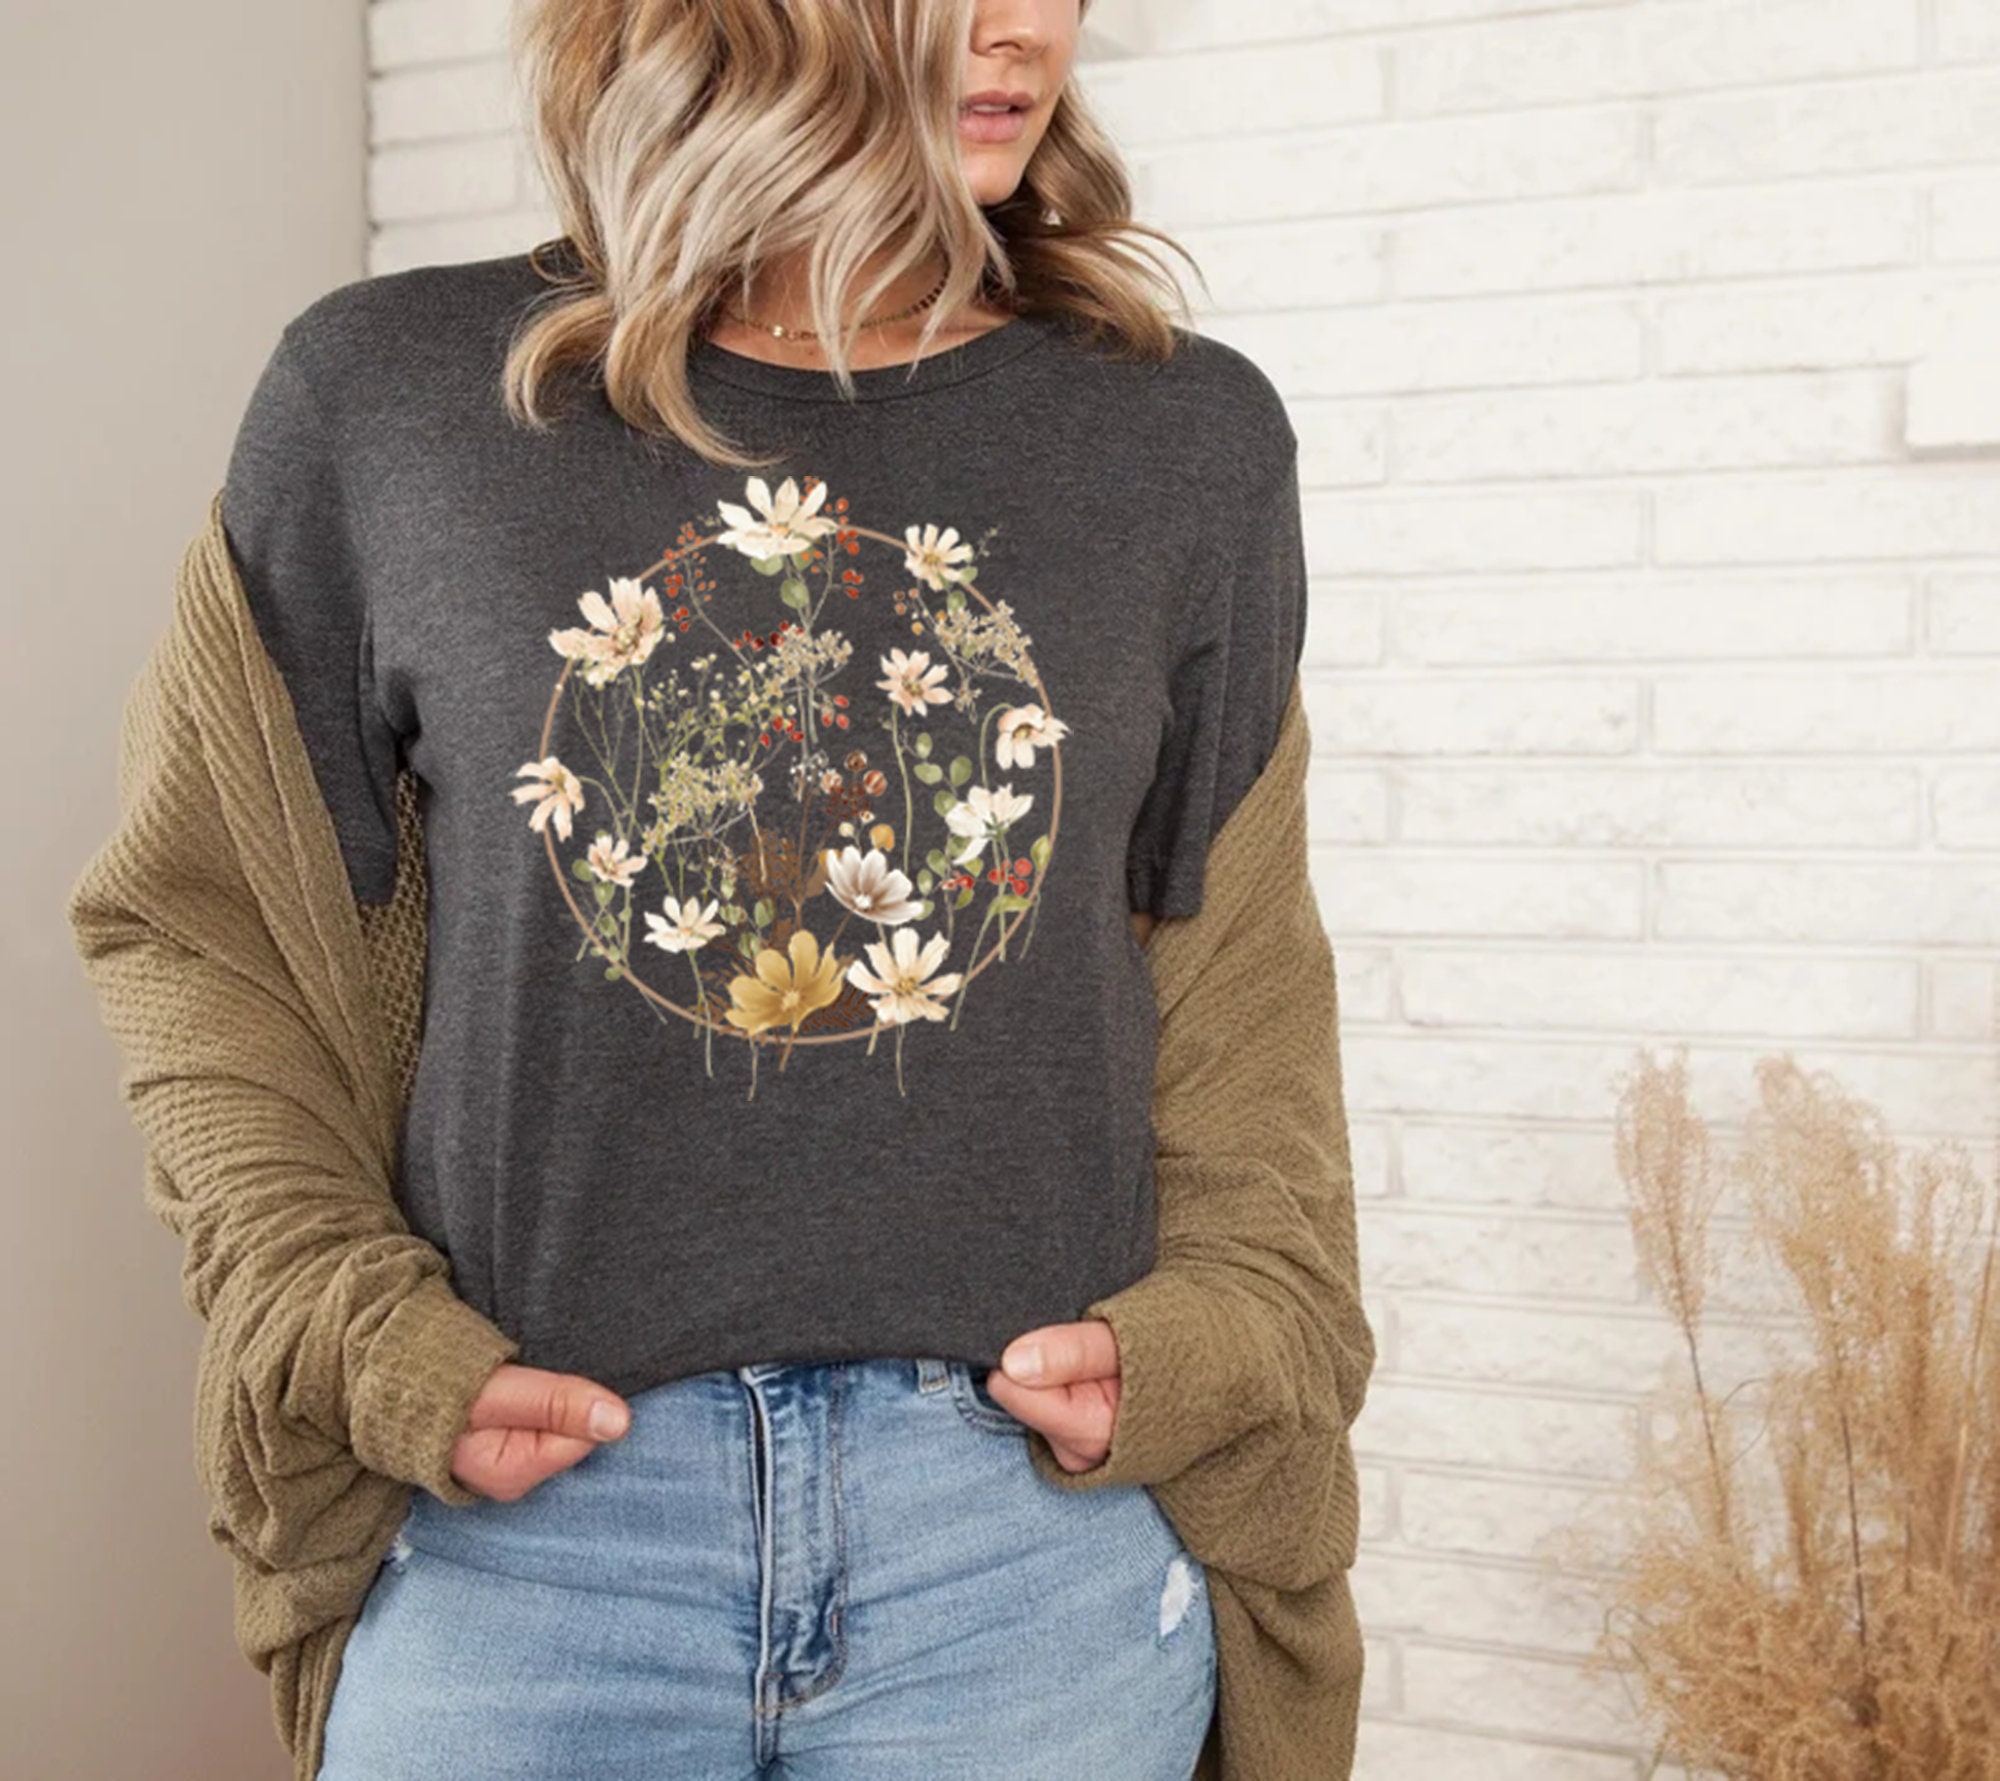 Discover Flower Shirt, Gift For Her, Flower Shirt Aesthetic, Floral Graphic Tee, Floral Shirt, Flower T-shirt, Wild Flower Shirt, Wildflower T-shirt